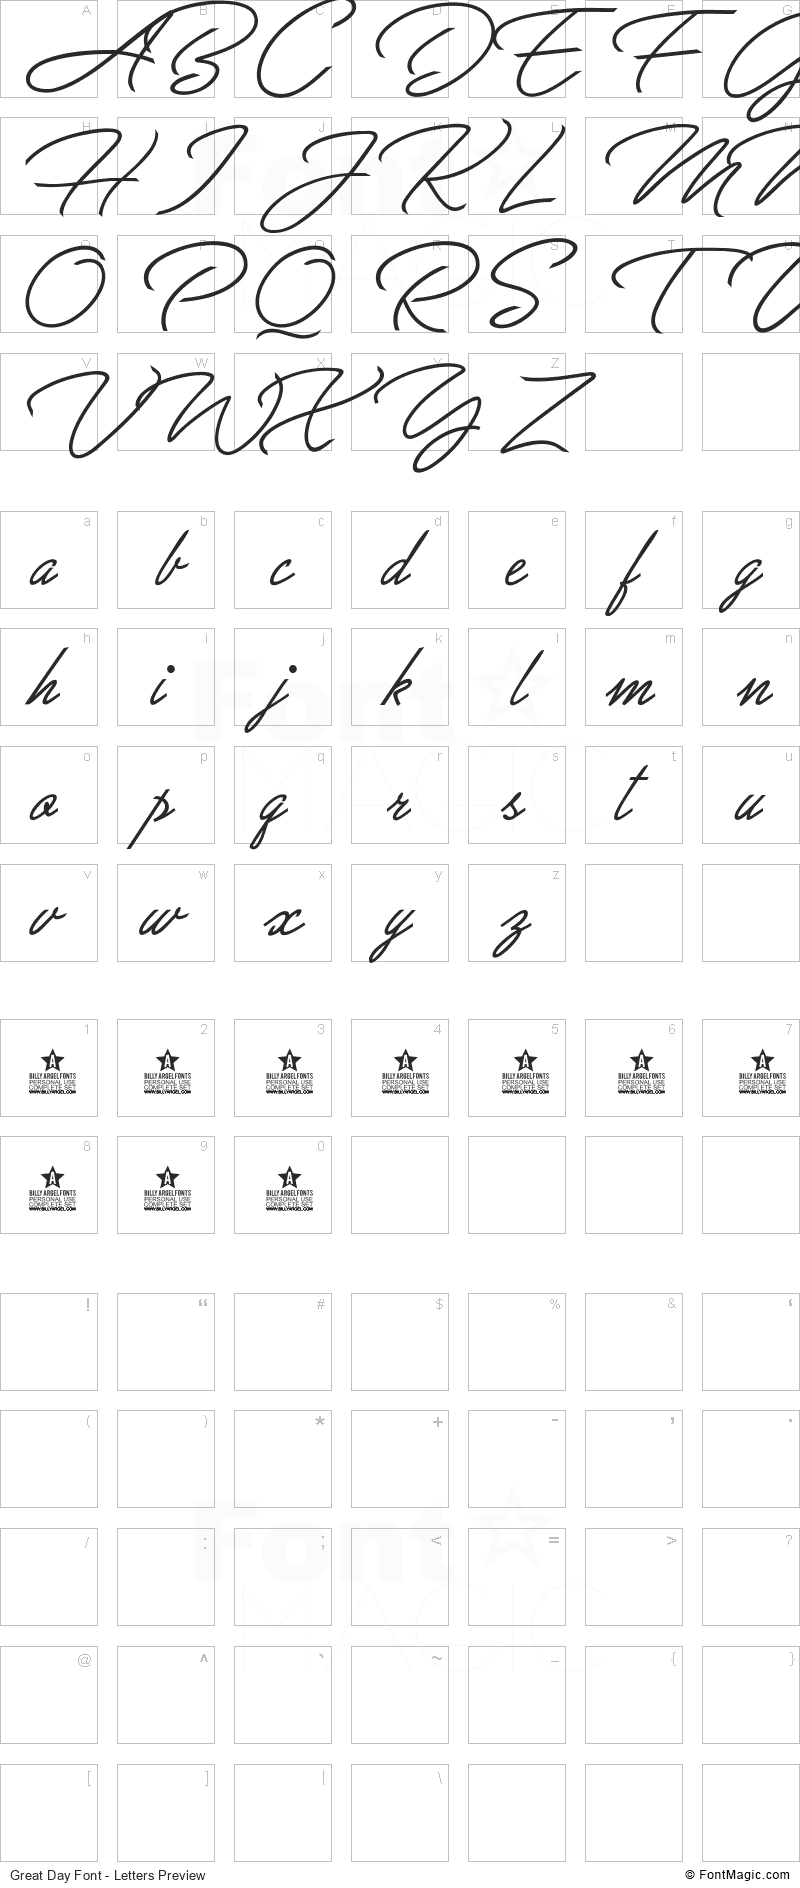 Great Day Font - All Latters Preview Chart